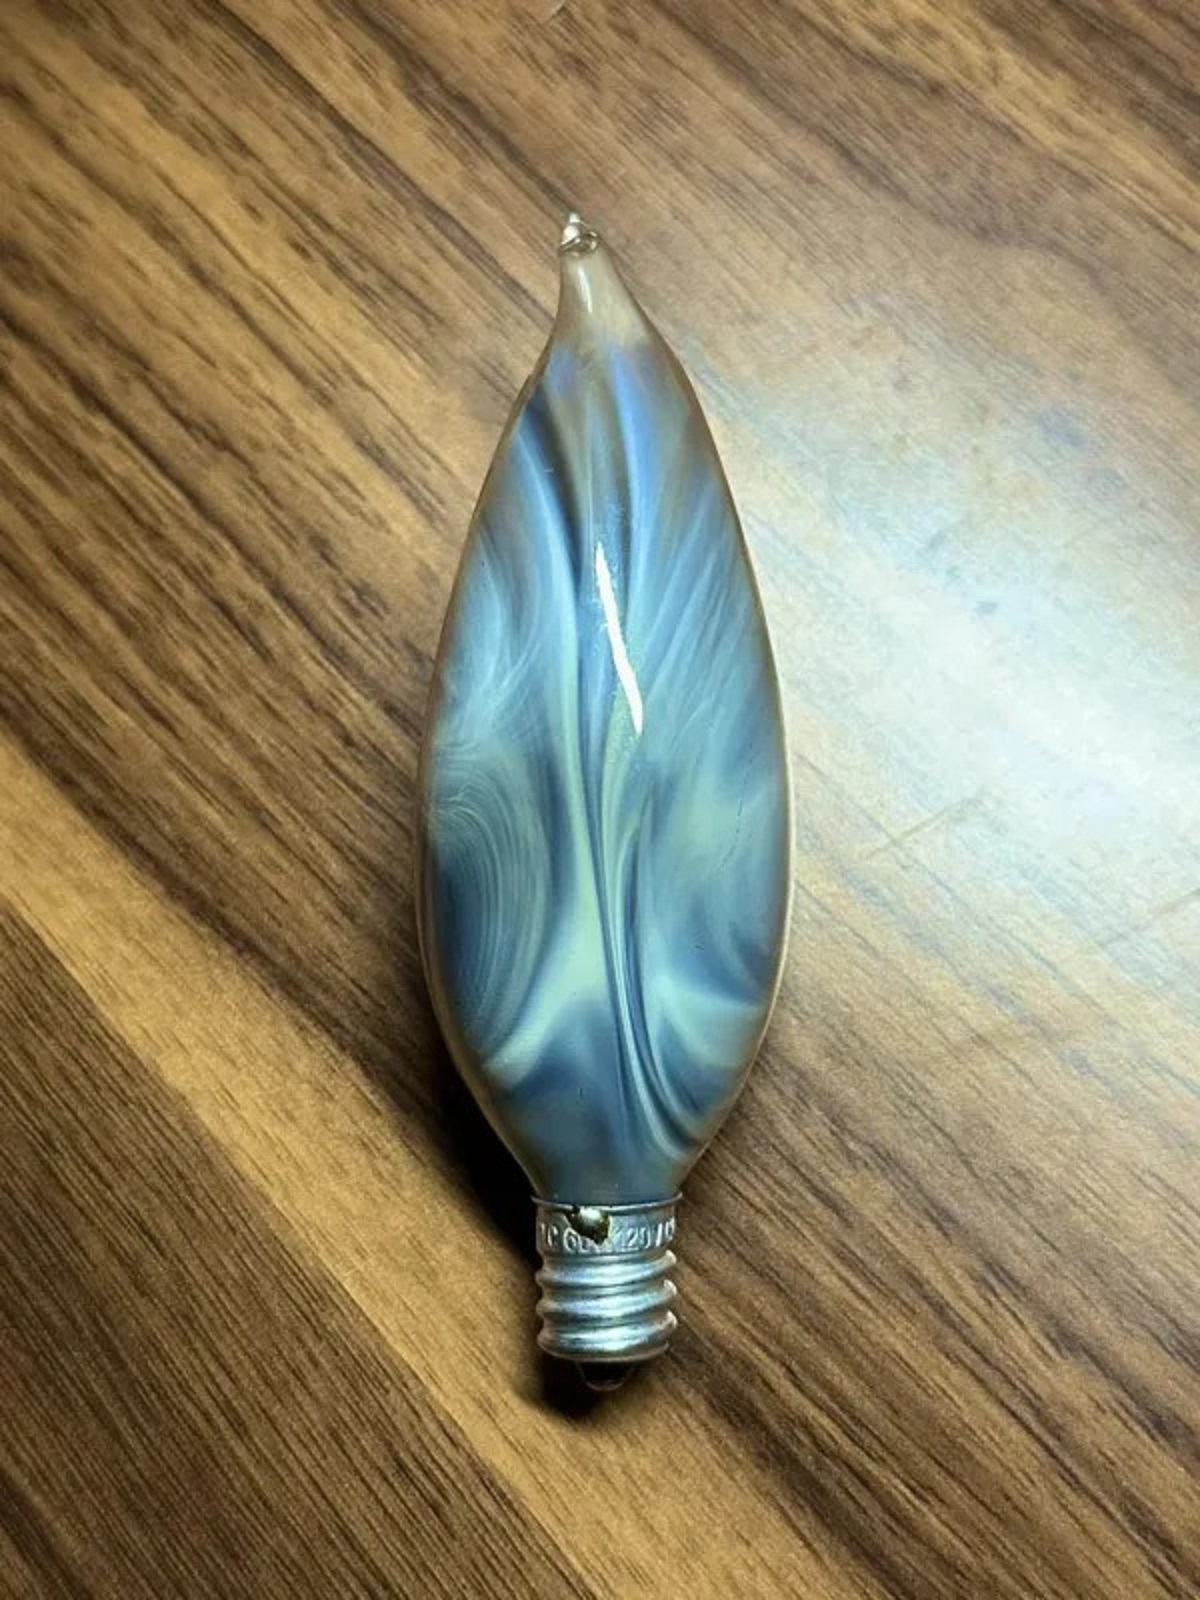 The pattern that formed inside this burnt out light bulb.